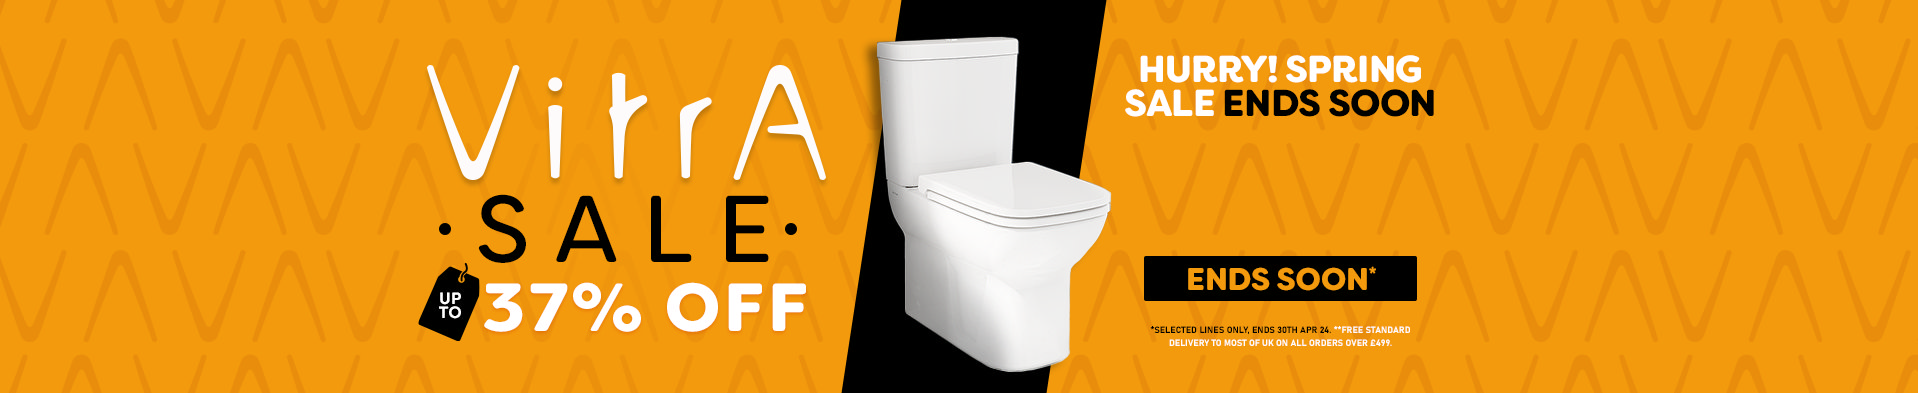 Vitra Sale - Ends Soon